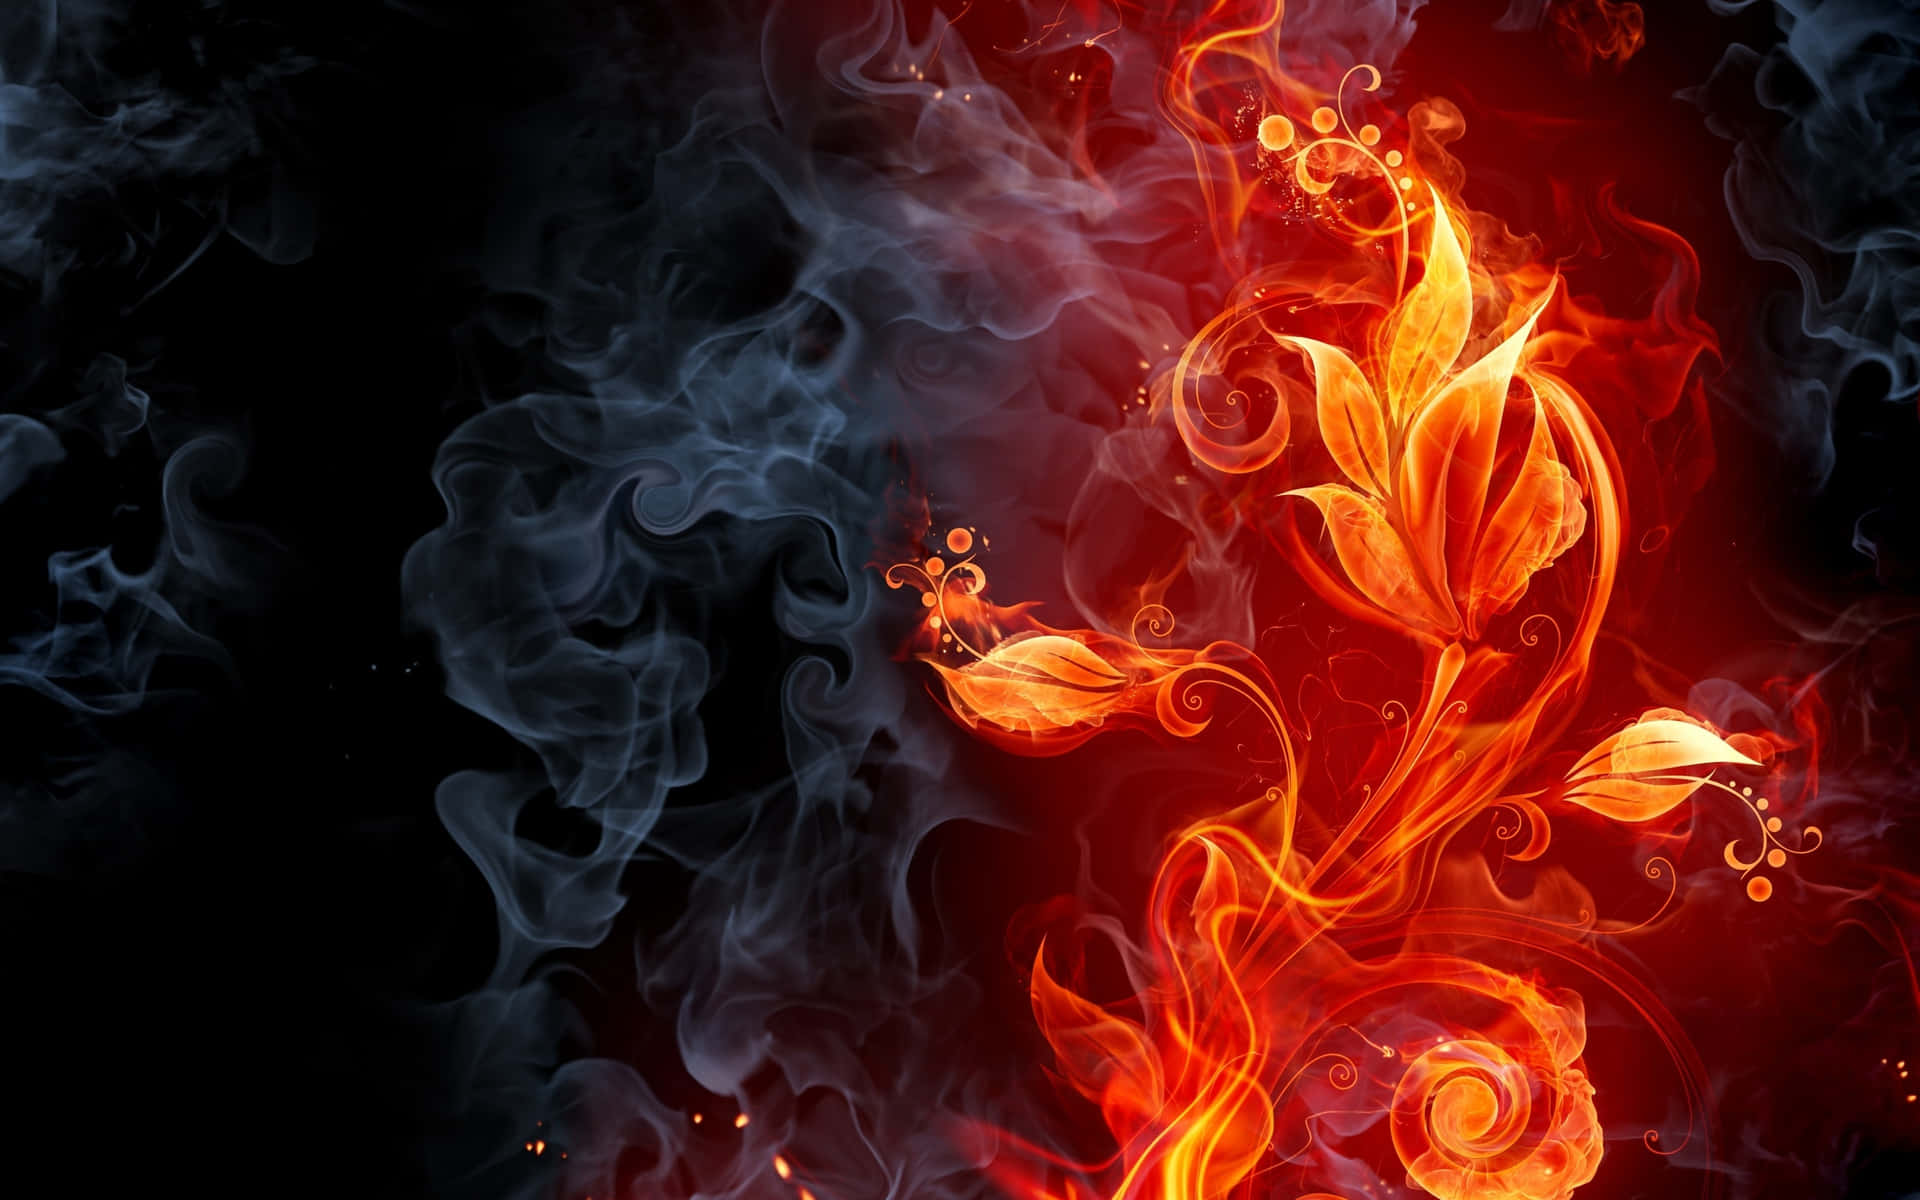 Get ready to be mesmerised by this striking red fire background